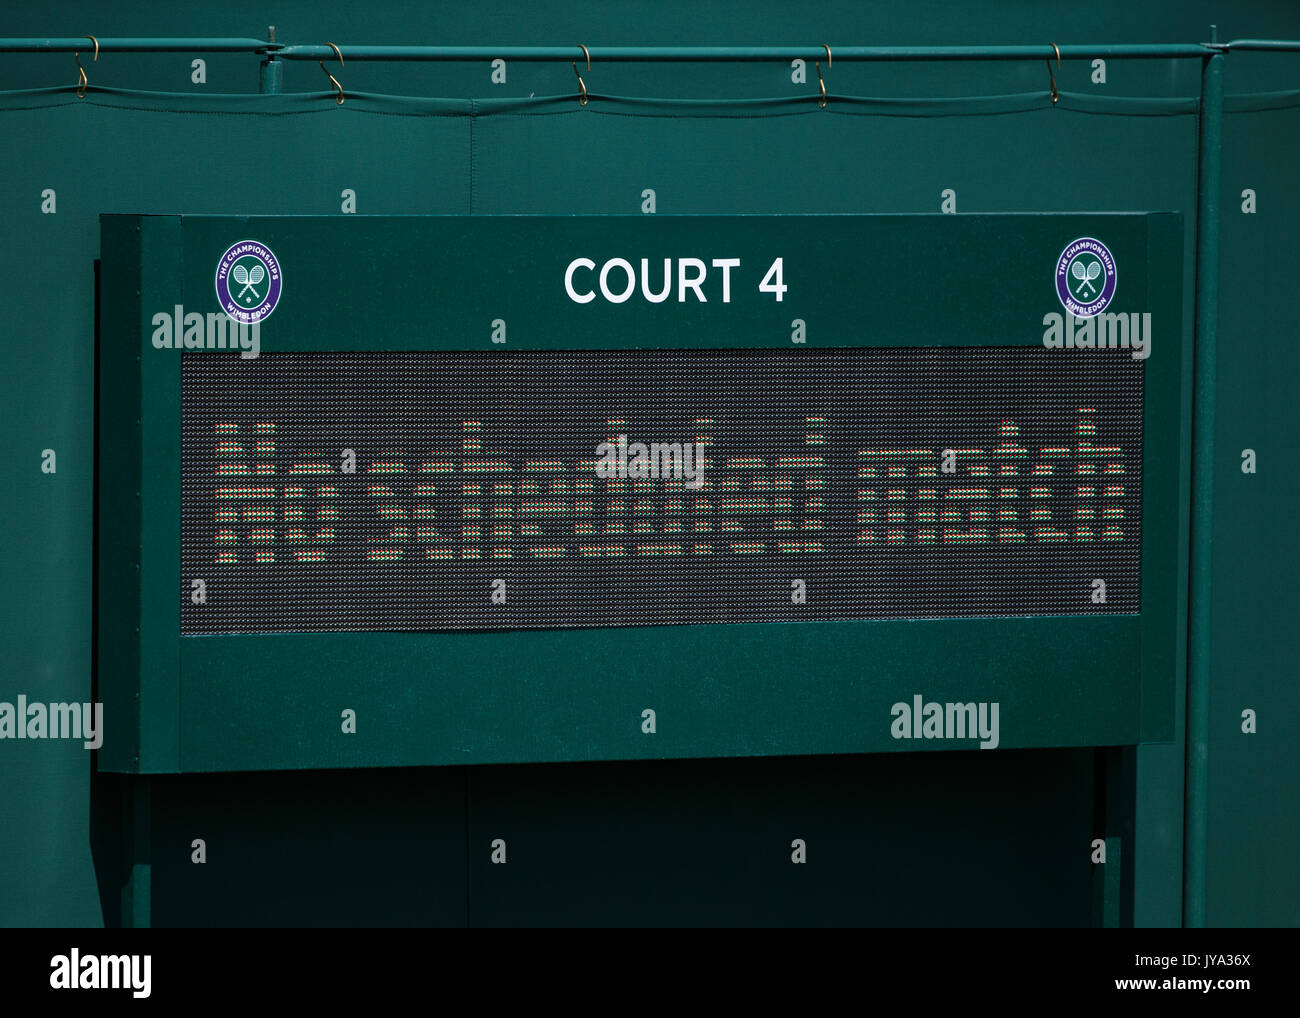 Wimbledon Feature  'No Scheduled Match' sign on a court at Wimbledon Tennis Championships 2017, London, Great Britain, United Kingdom. Stock Photo